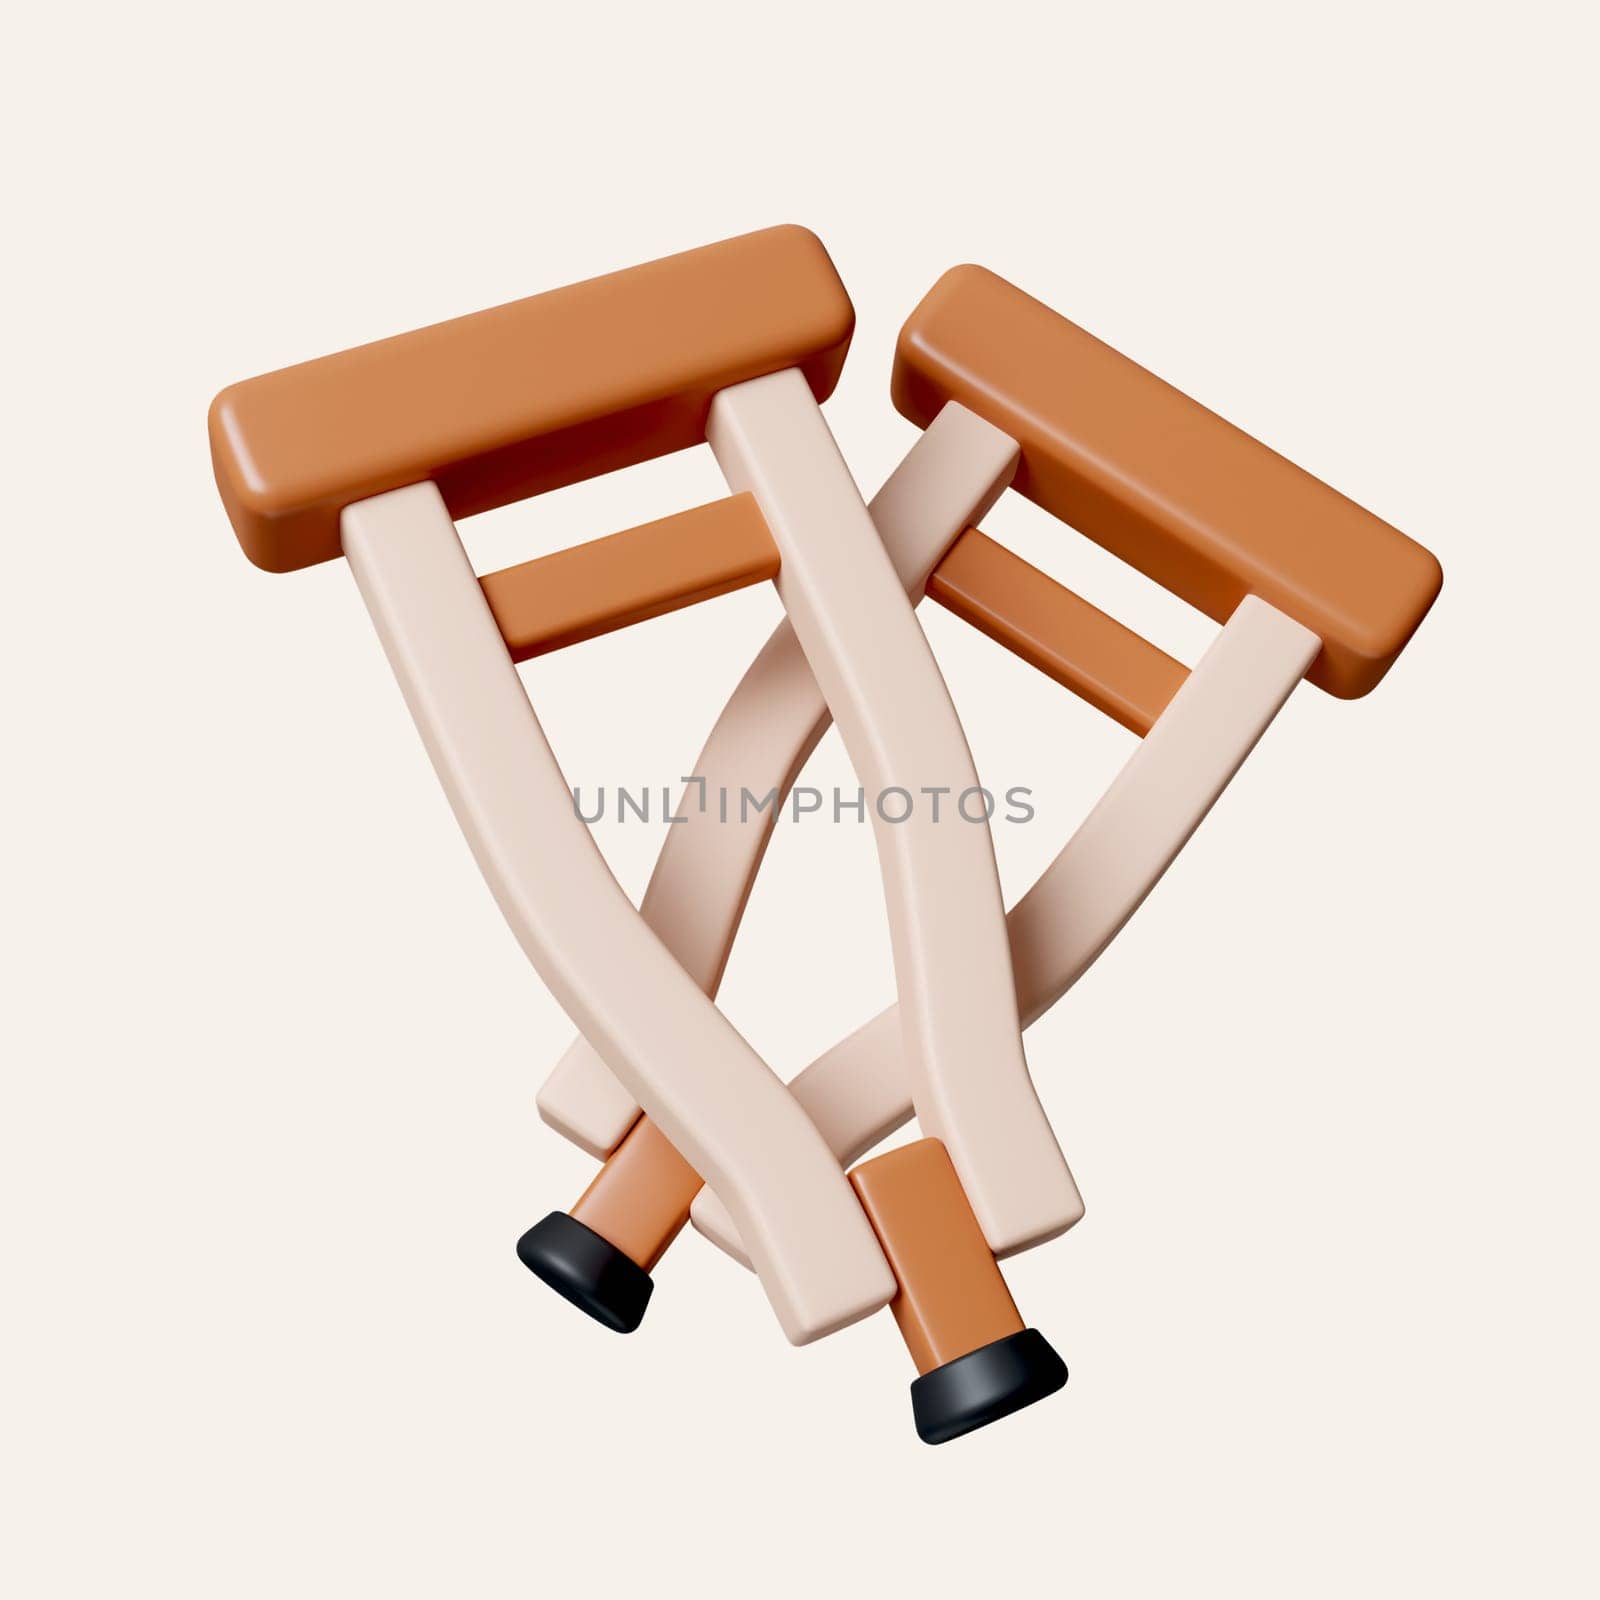 3d medical crutches handicap assistance equipment for injured or disabled patient. icon isolated on white background. 3d rendering illustration. Clipping path..